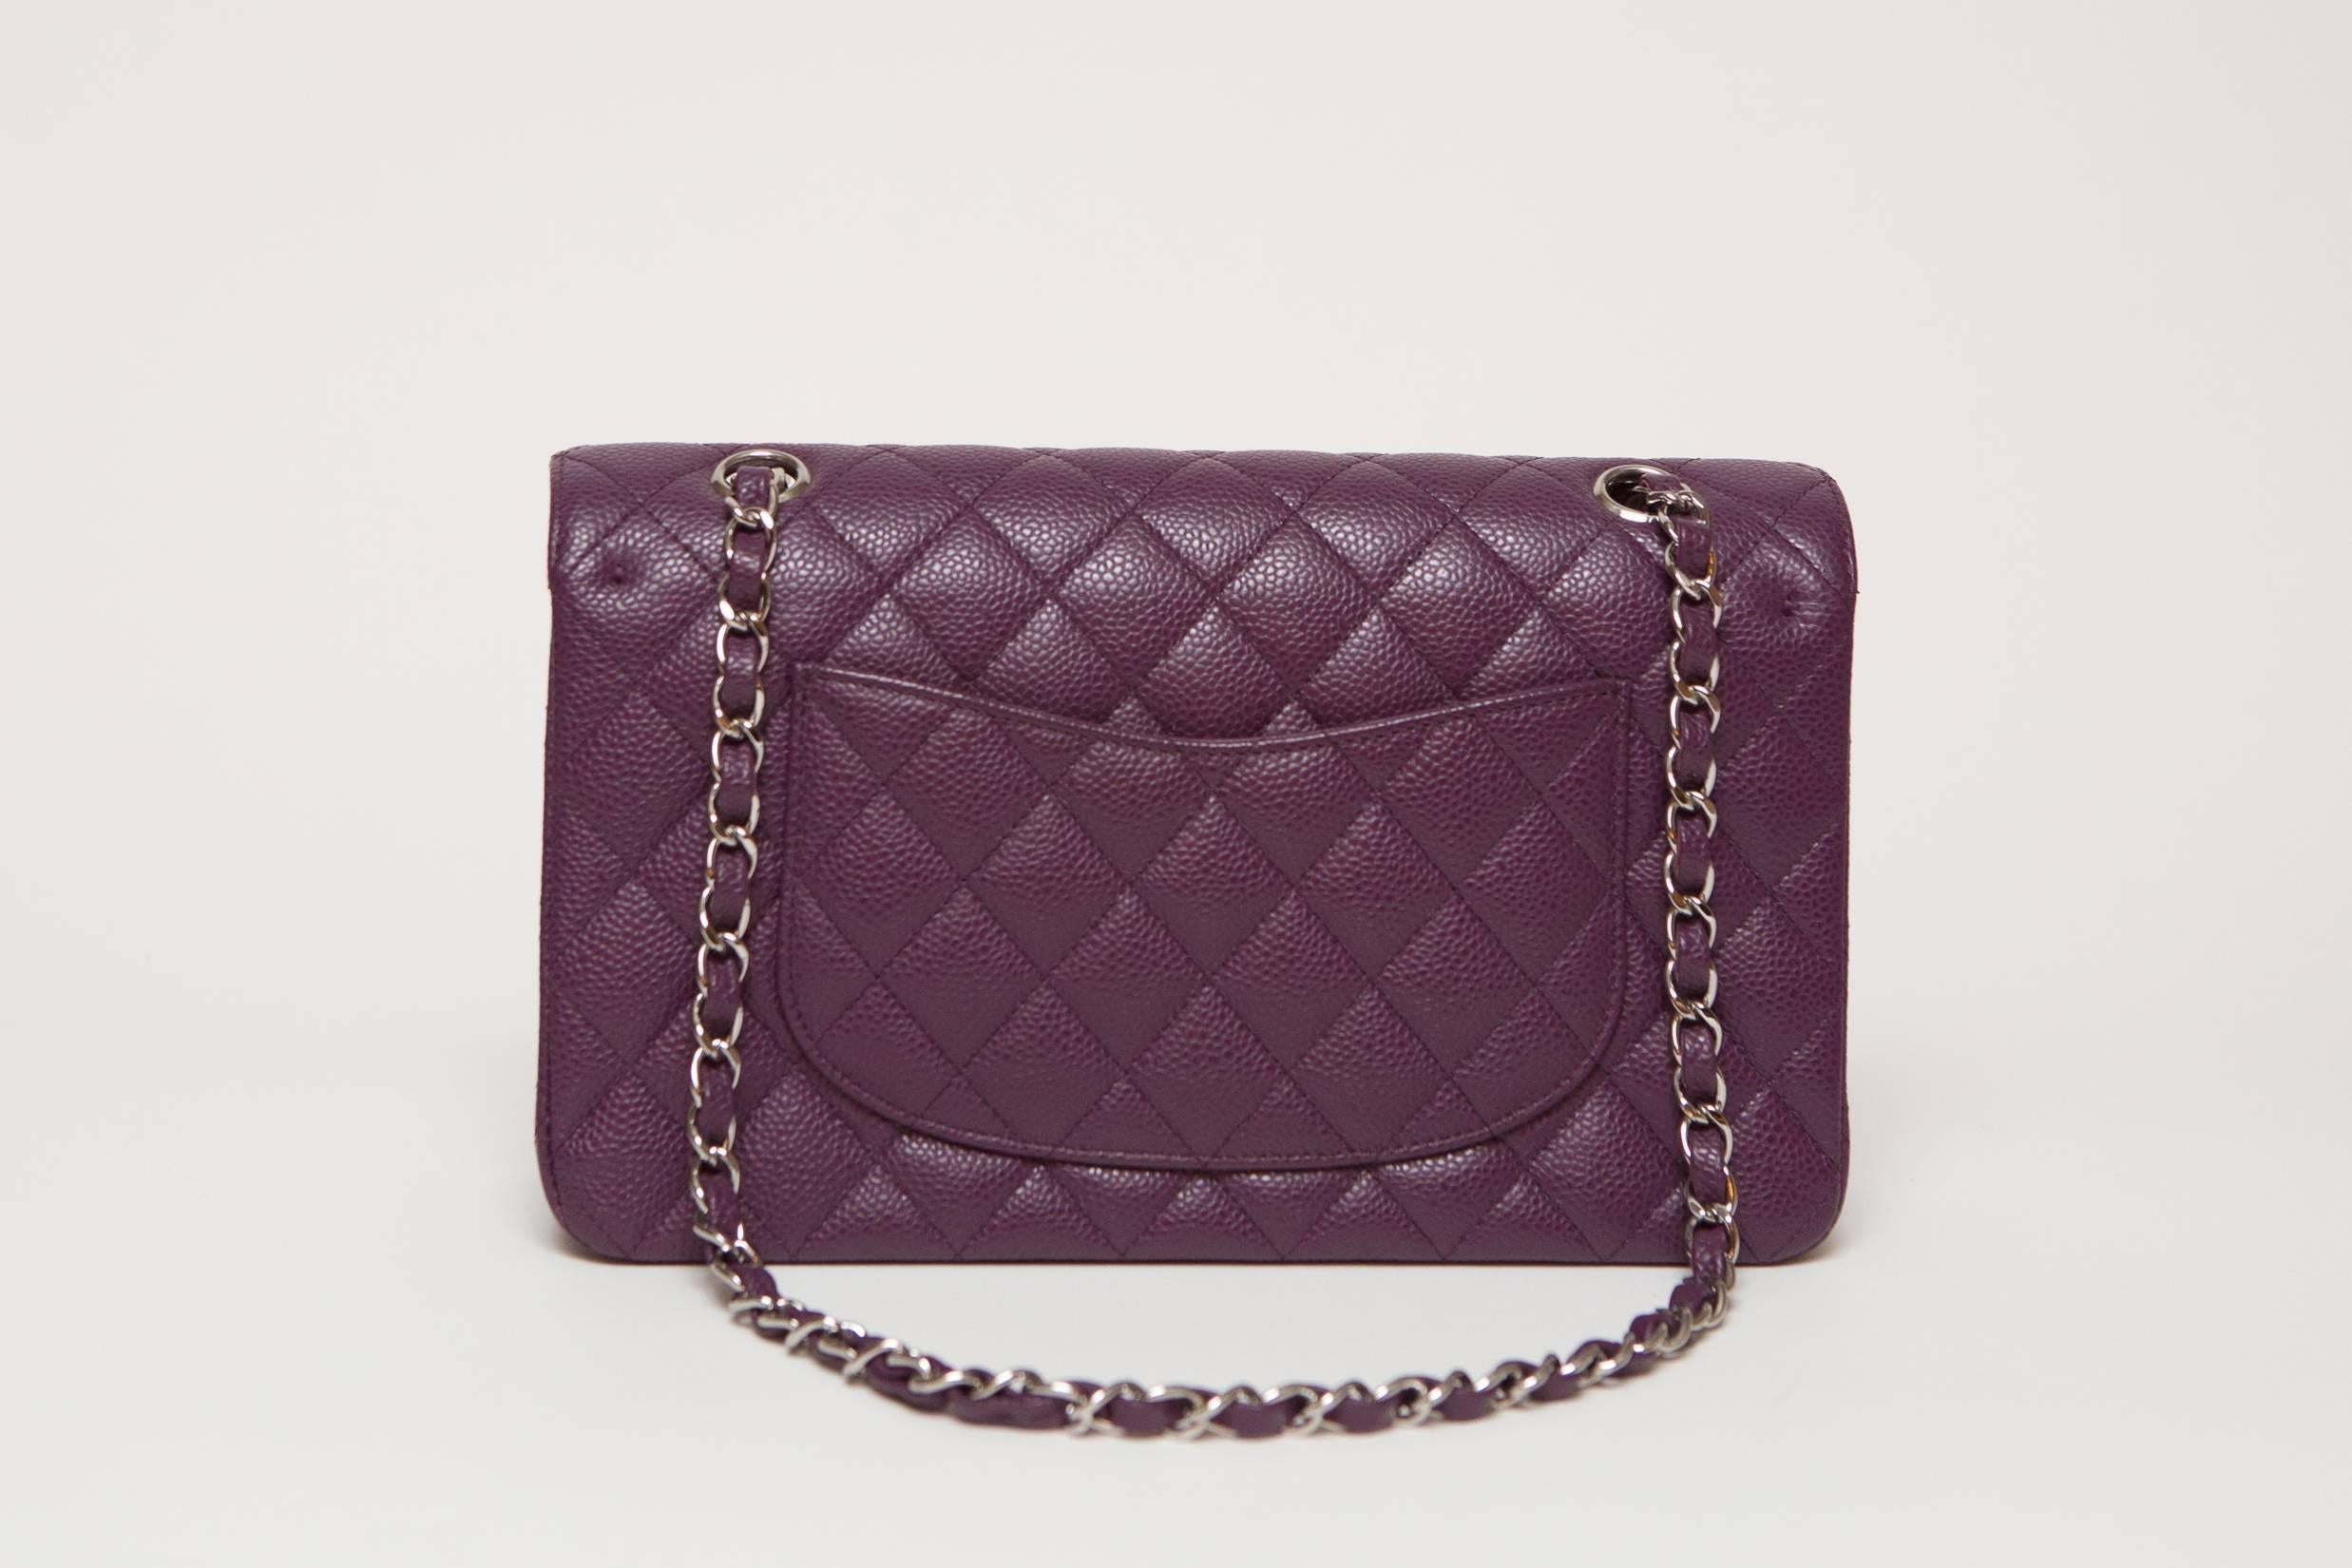 Chanel Purple Leather Maxi Classic 2.55. ID: 10995705 NEW, never worn.
Year: 2005-2006.